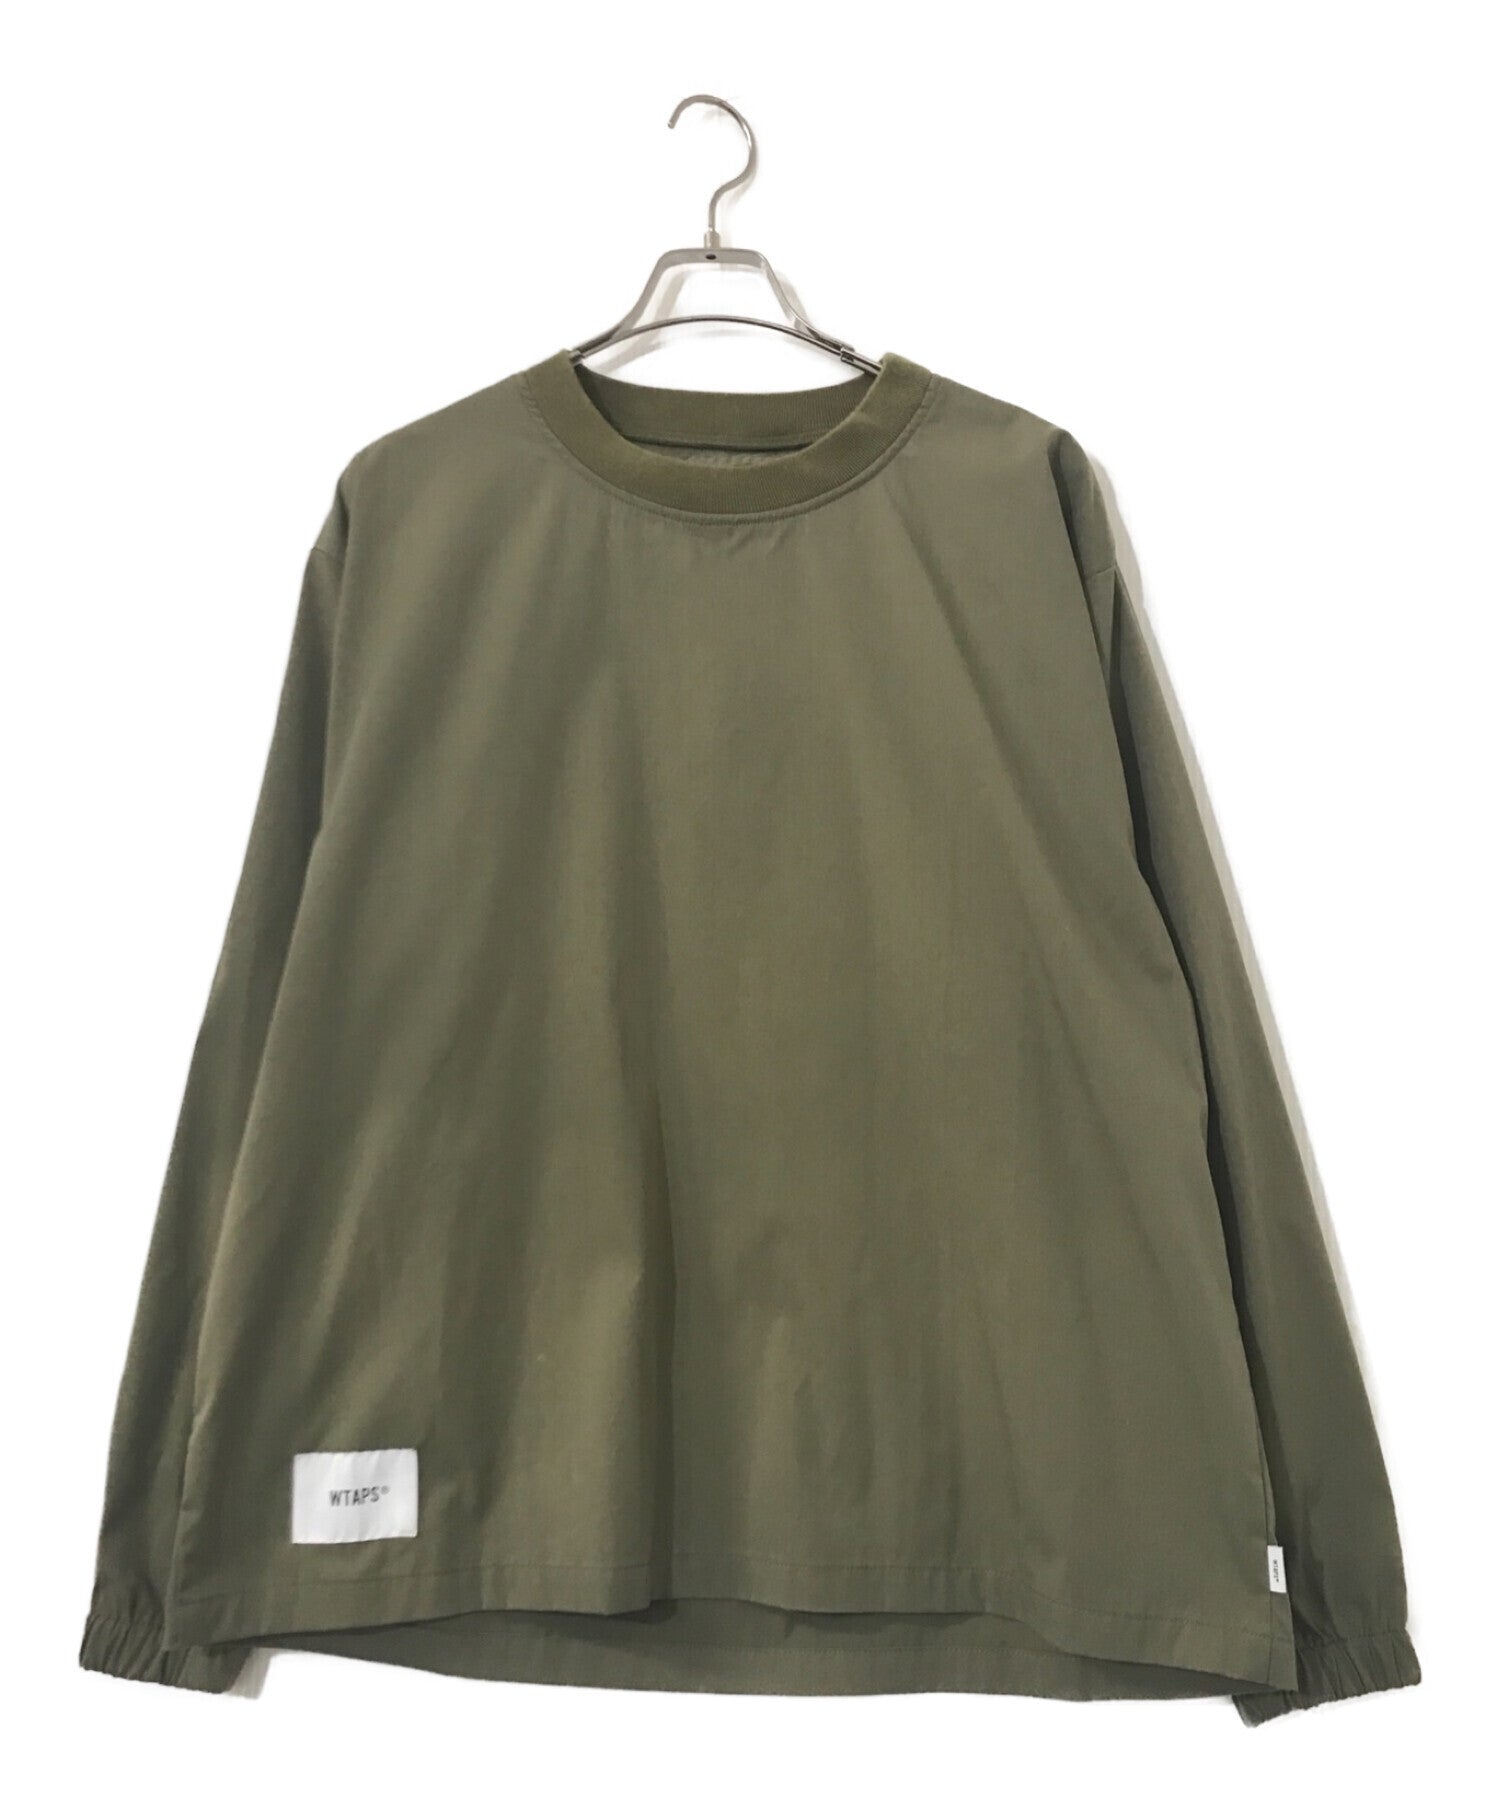 WTAPS 20aw SMOCK / LS / POLY.TWILL - トップス